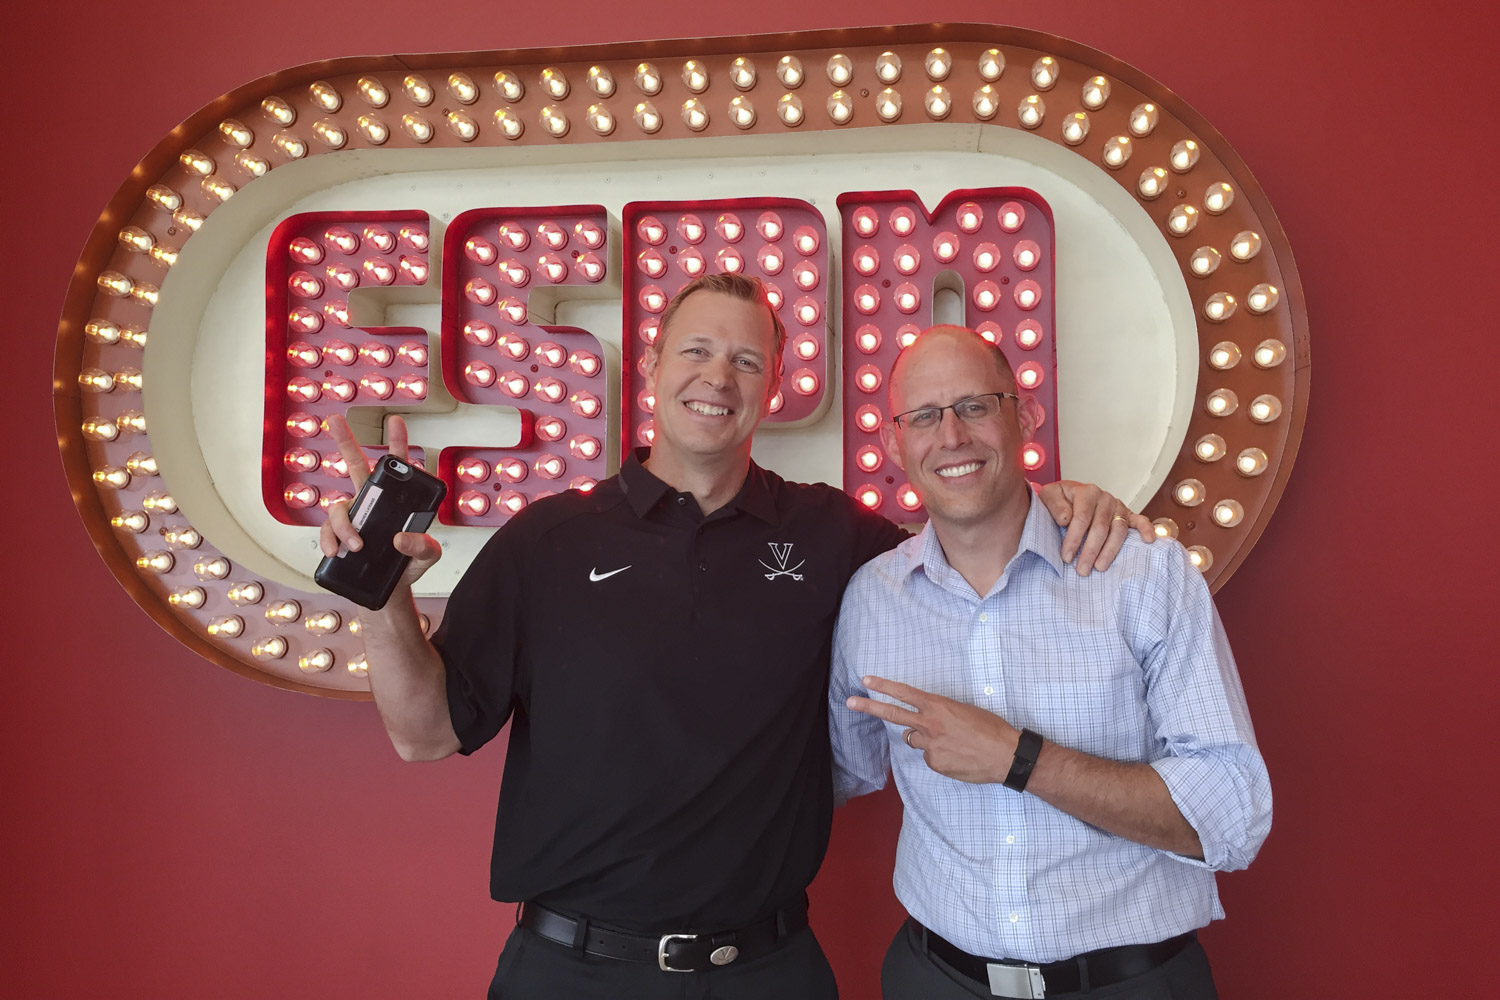 Bronco Mendenhall and Hofheimer posing together for a picture in front of a lighted ESPN sign